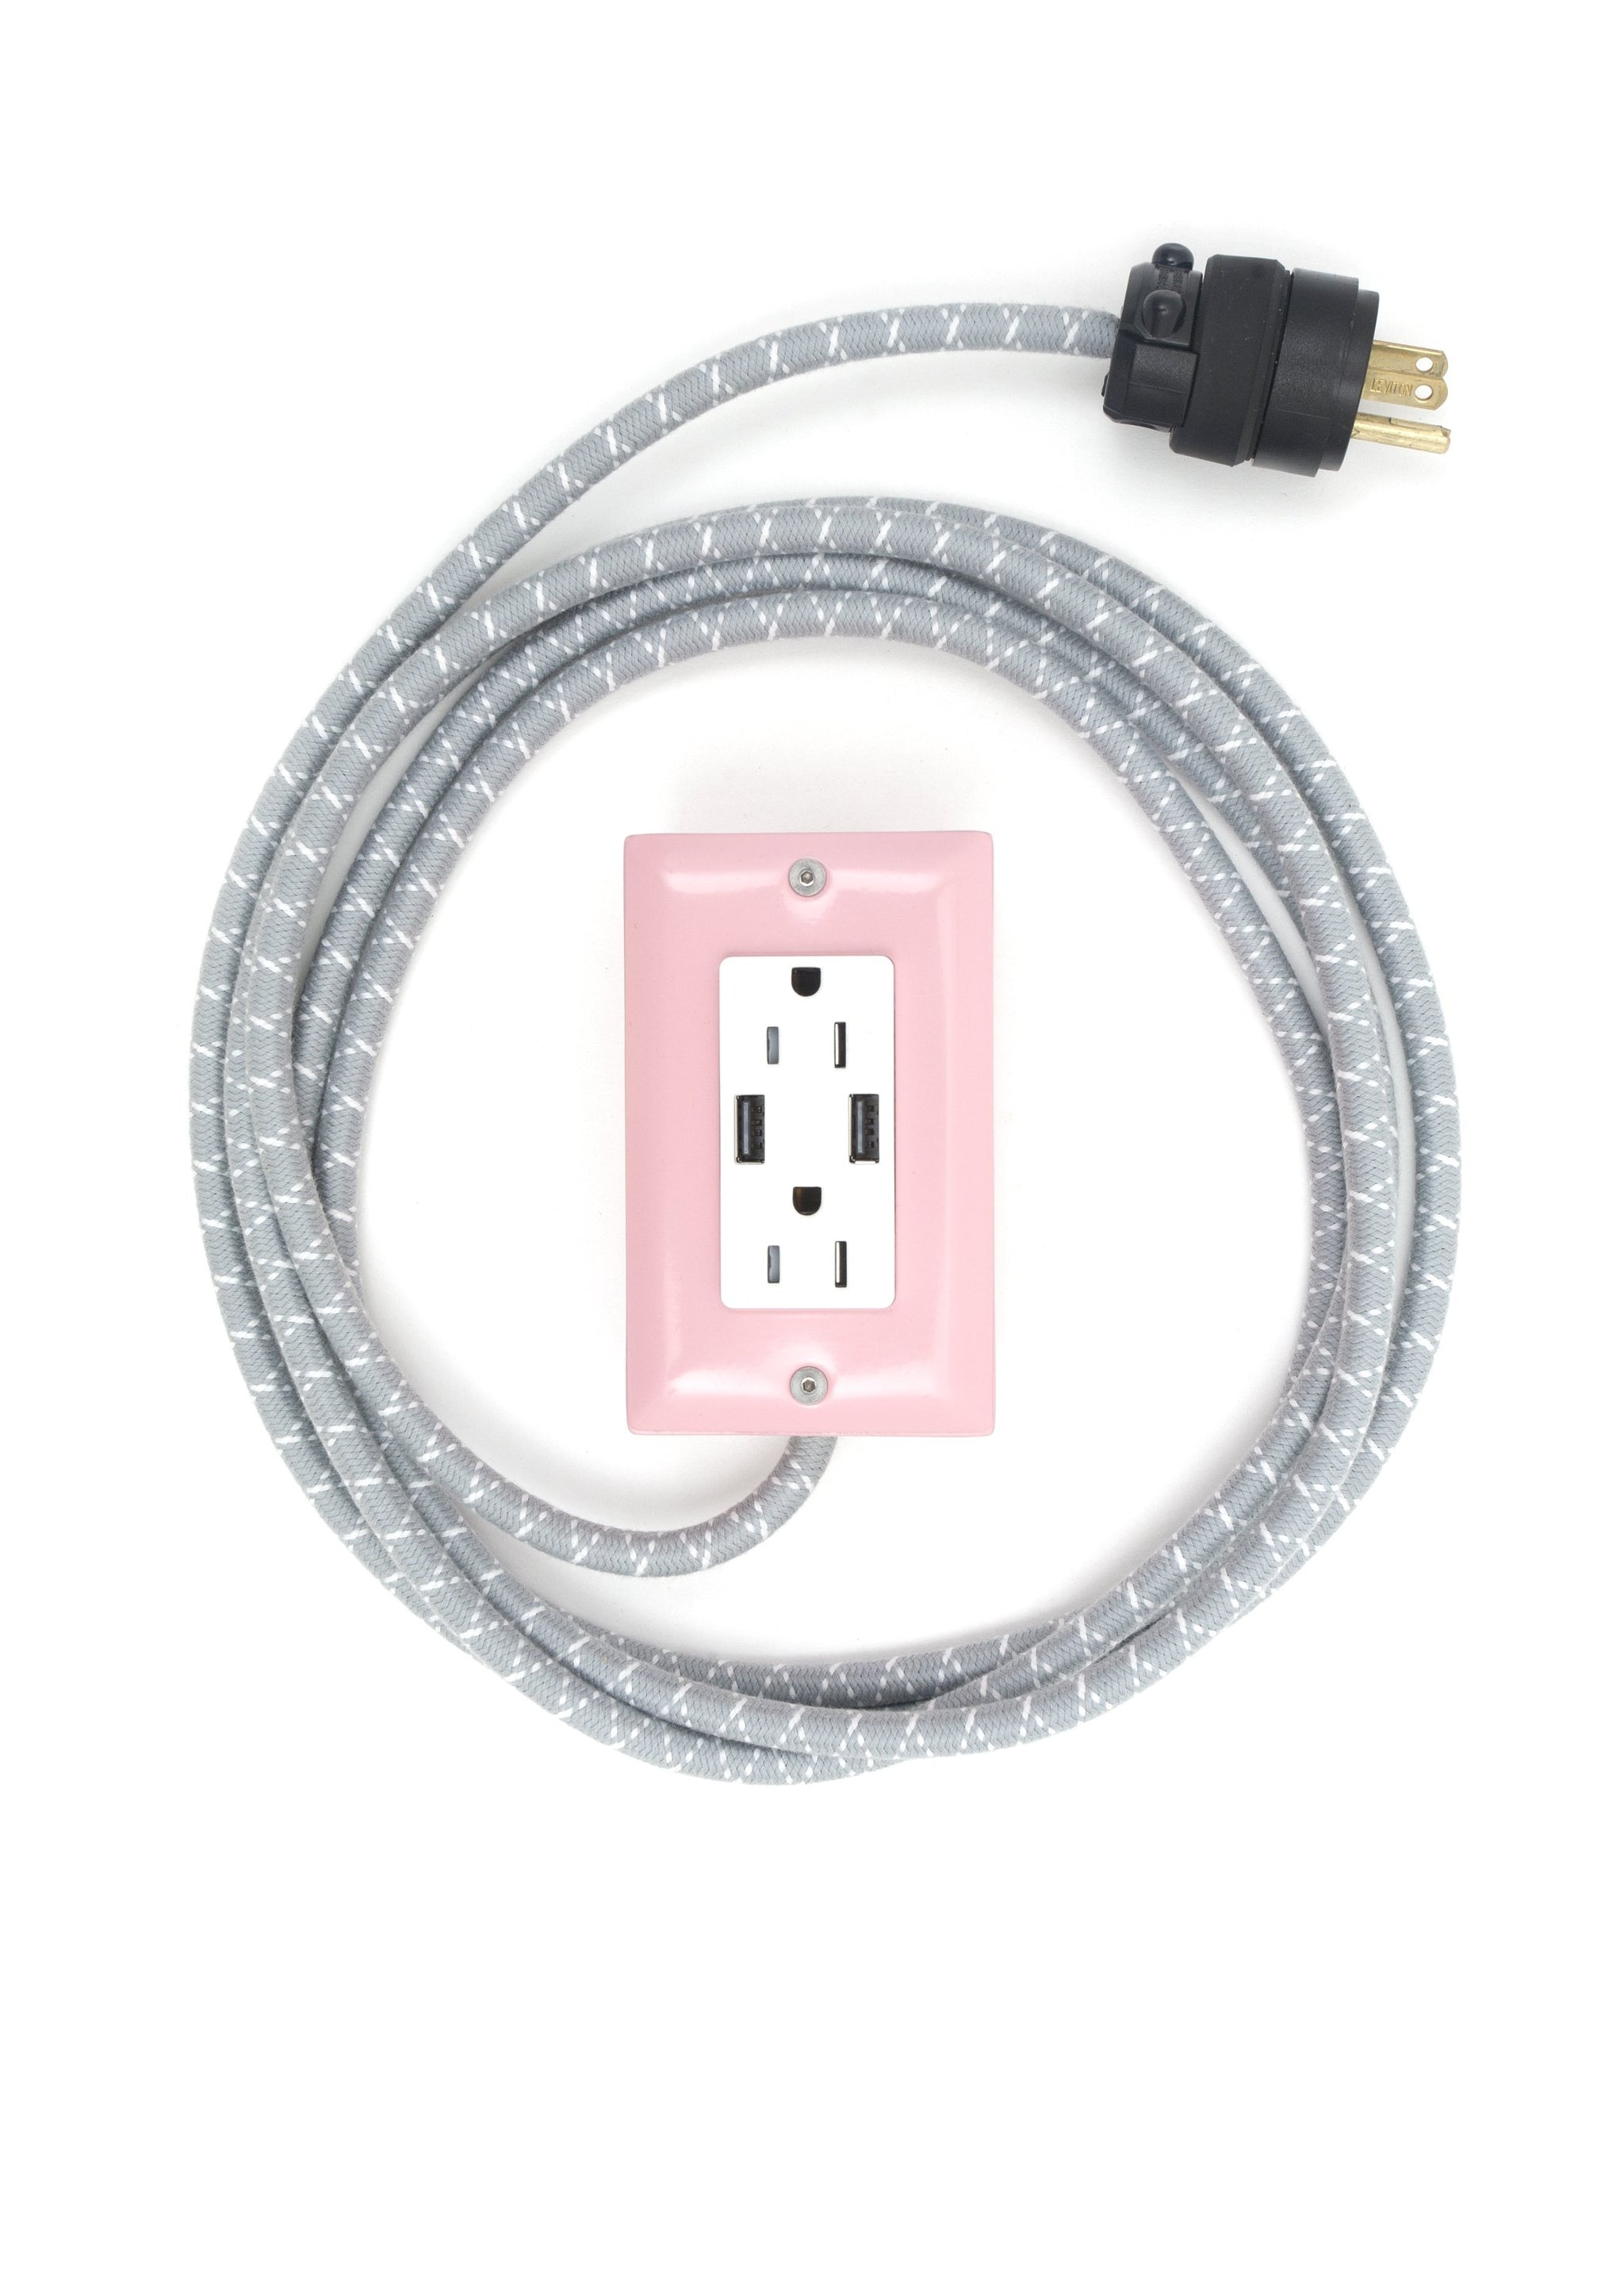 The First Smart Chip Extension Cord - 12' Extō Dual-USB, Dual-Outlet - Candy Pink